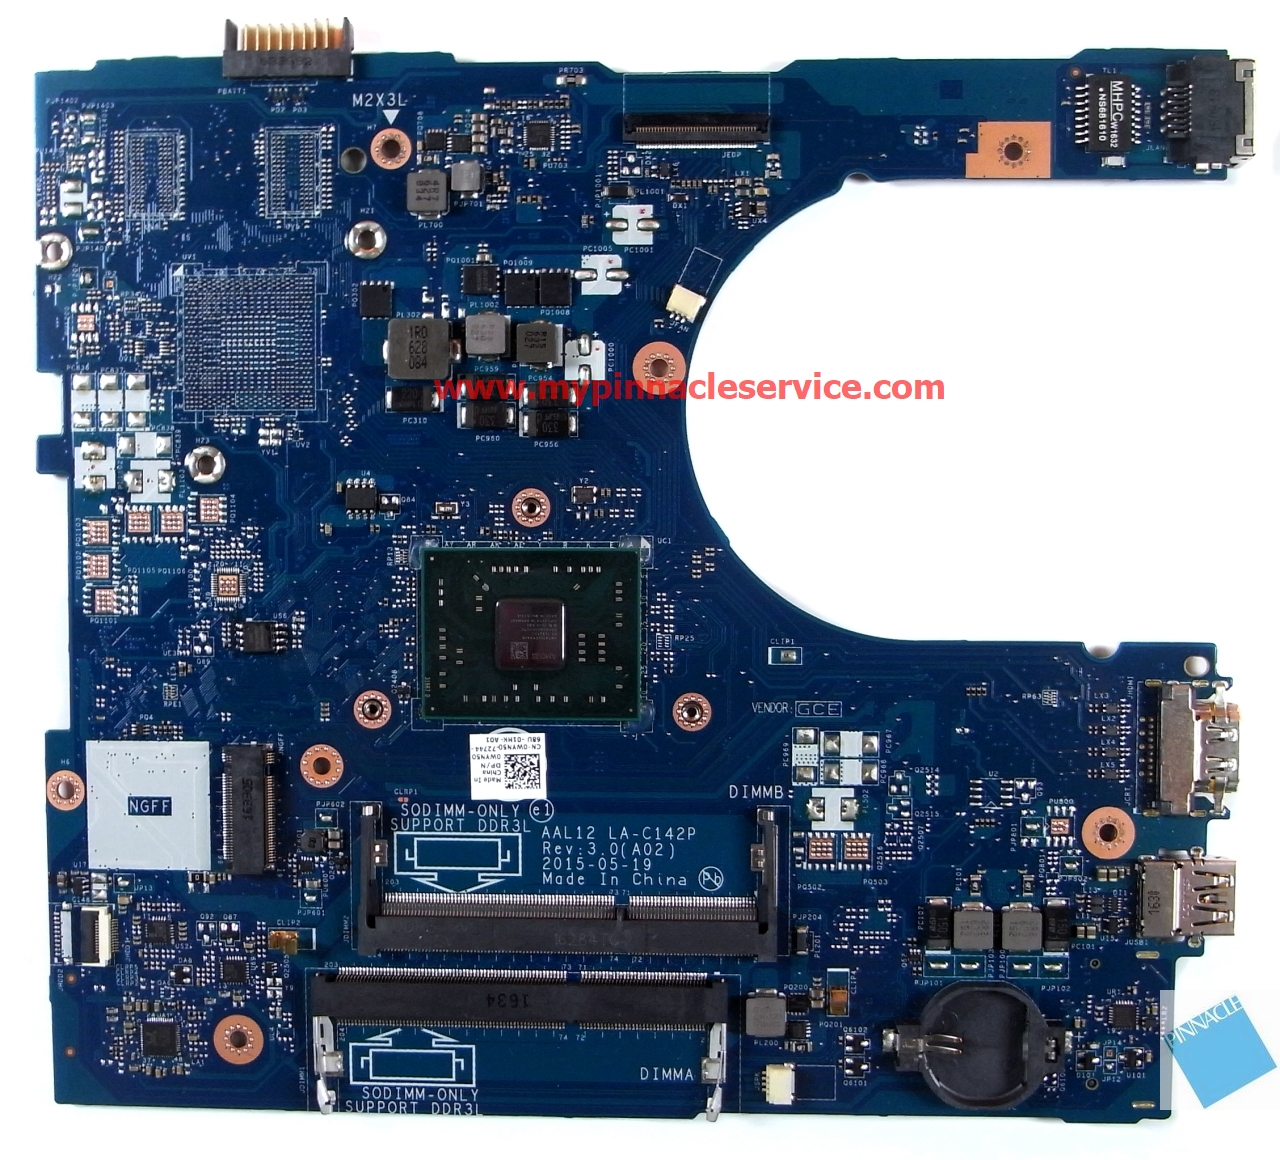 1n0c6-01n0c6-motherboard-for-dell-inspiron-5555-5755-a8-7410-cpu-la-c142p-r0011677.jpg